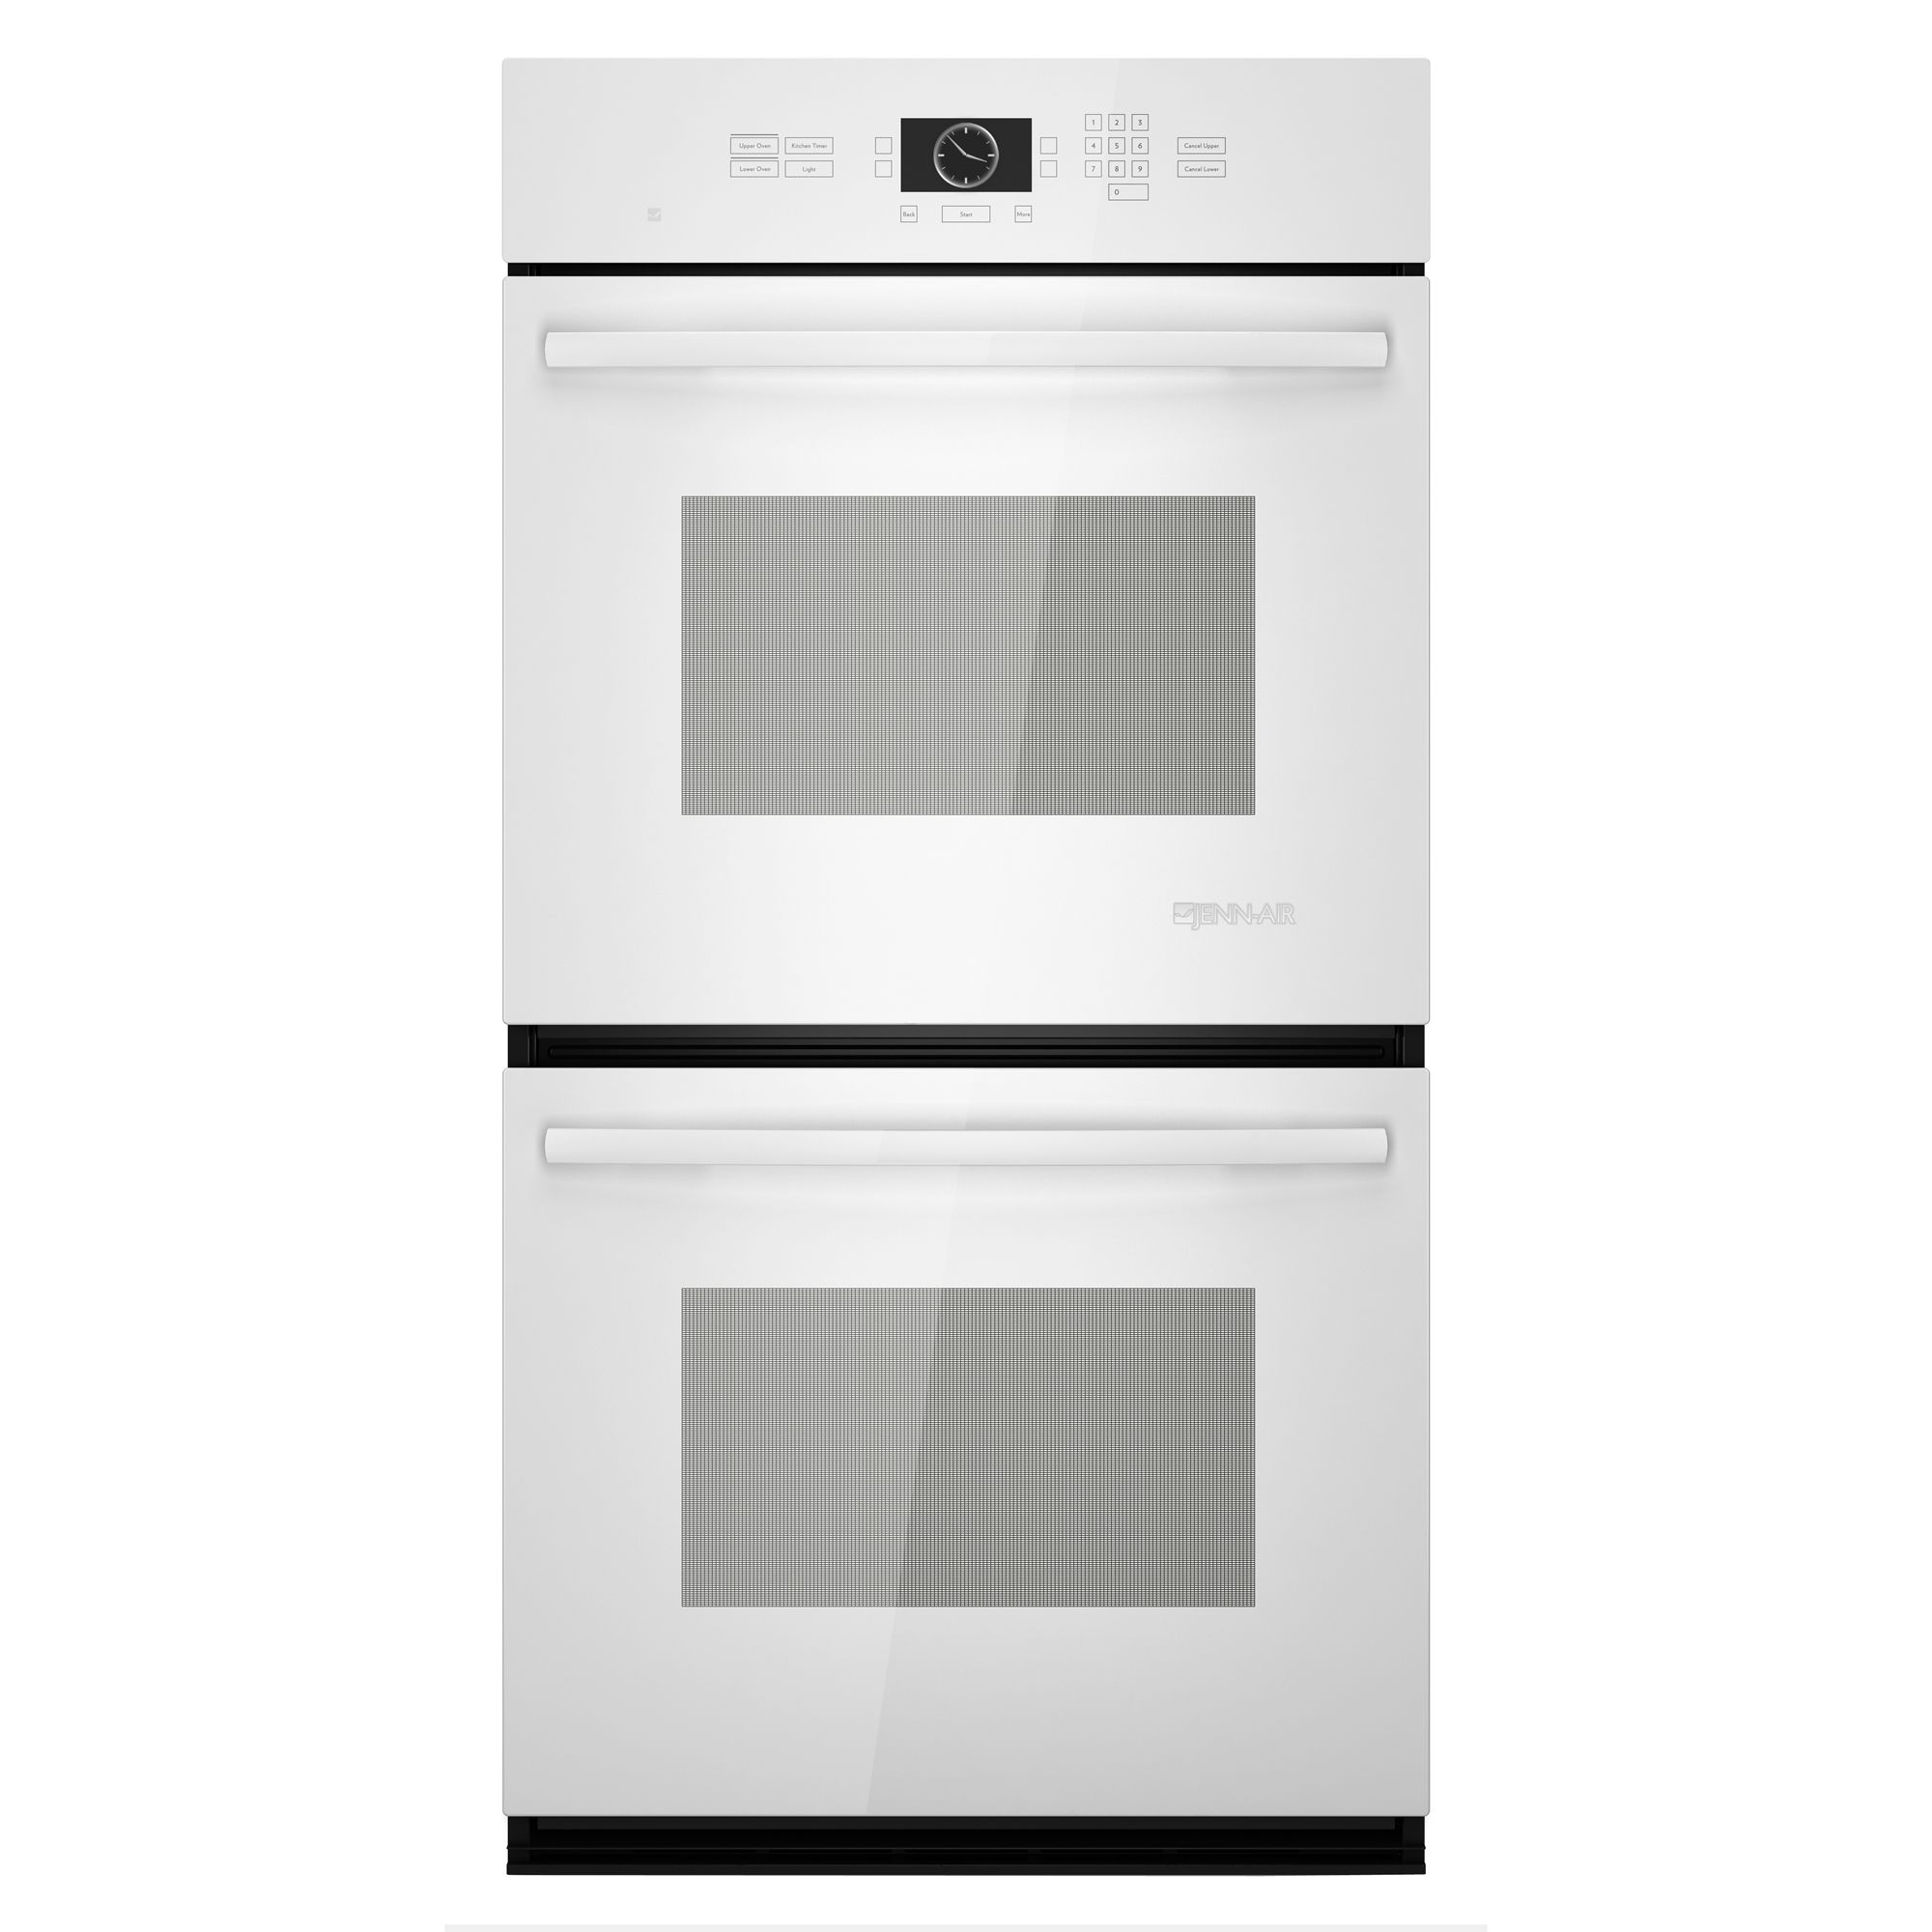 27" Electric Built-In Double Wall Oven logo